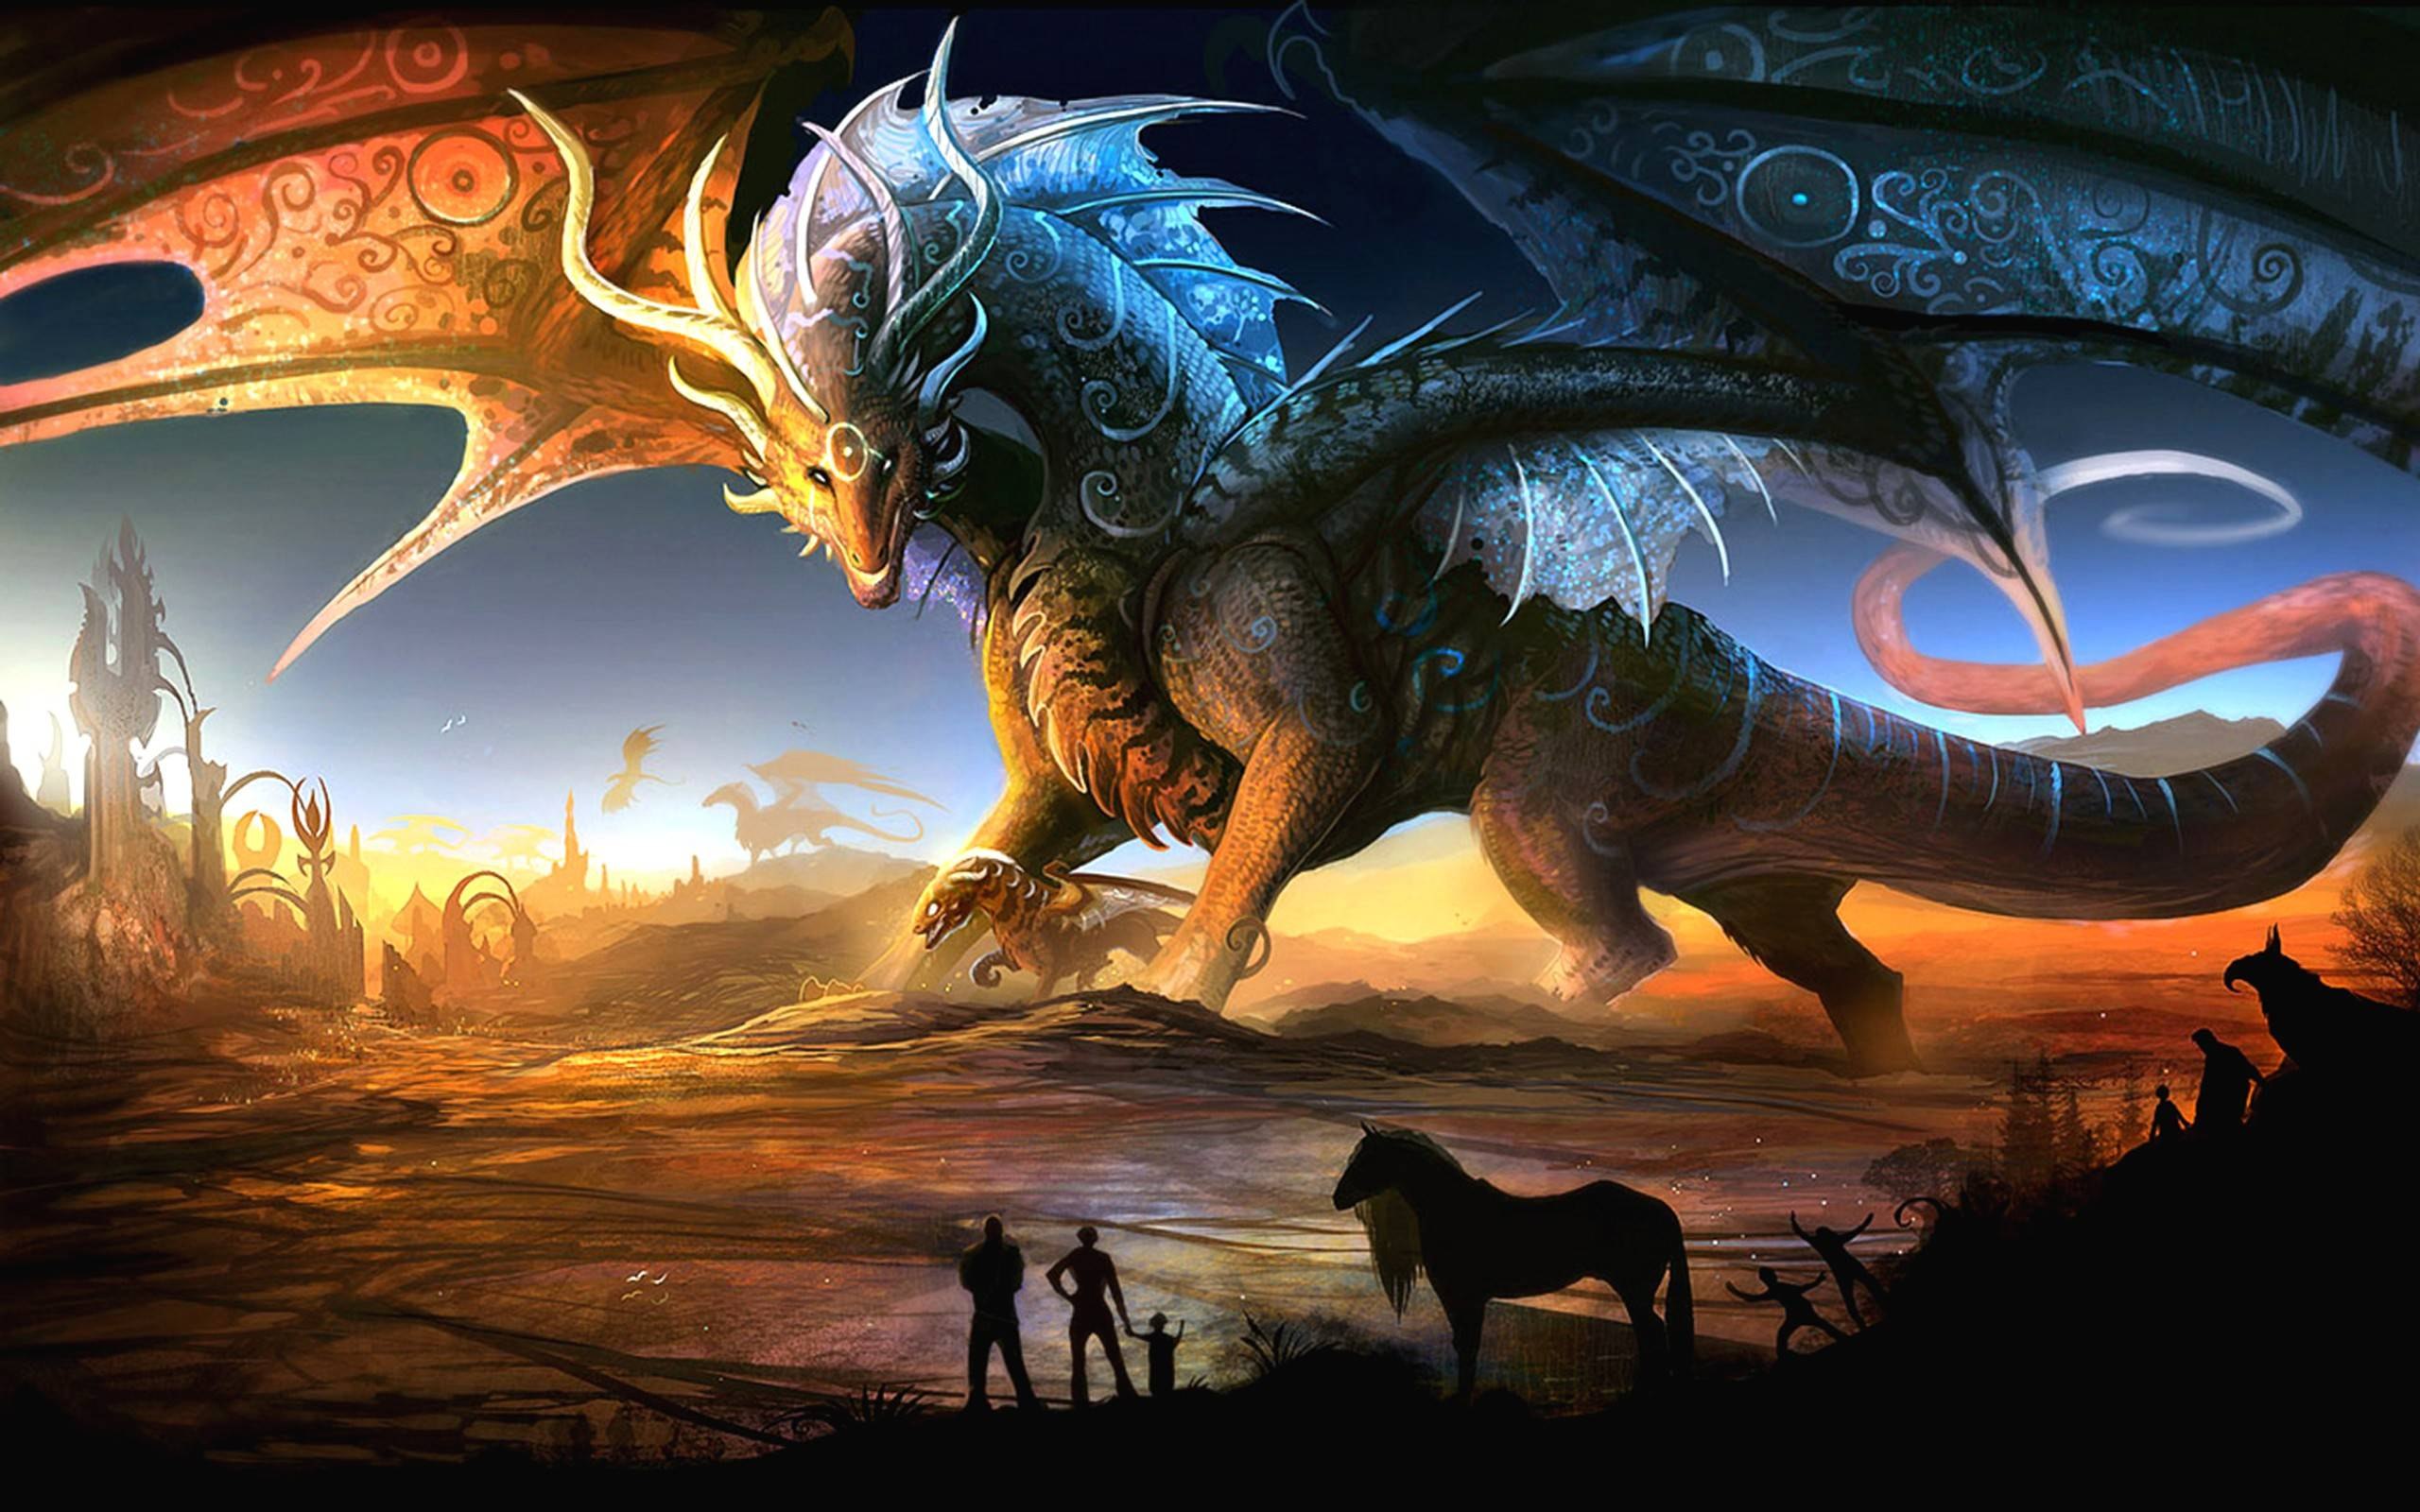 Dragon wallpaper 2560x1600 - - High Quality and other